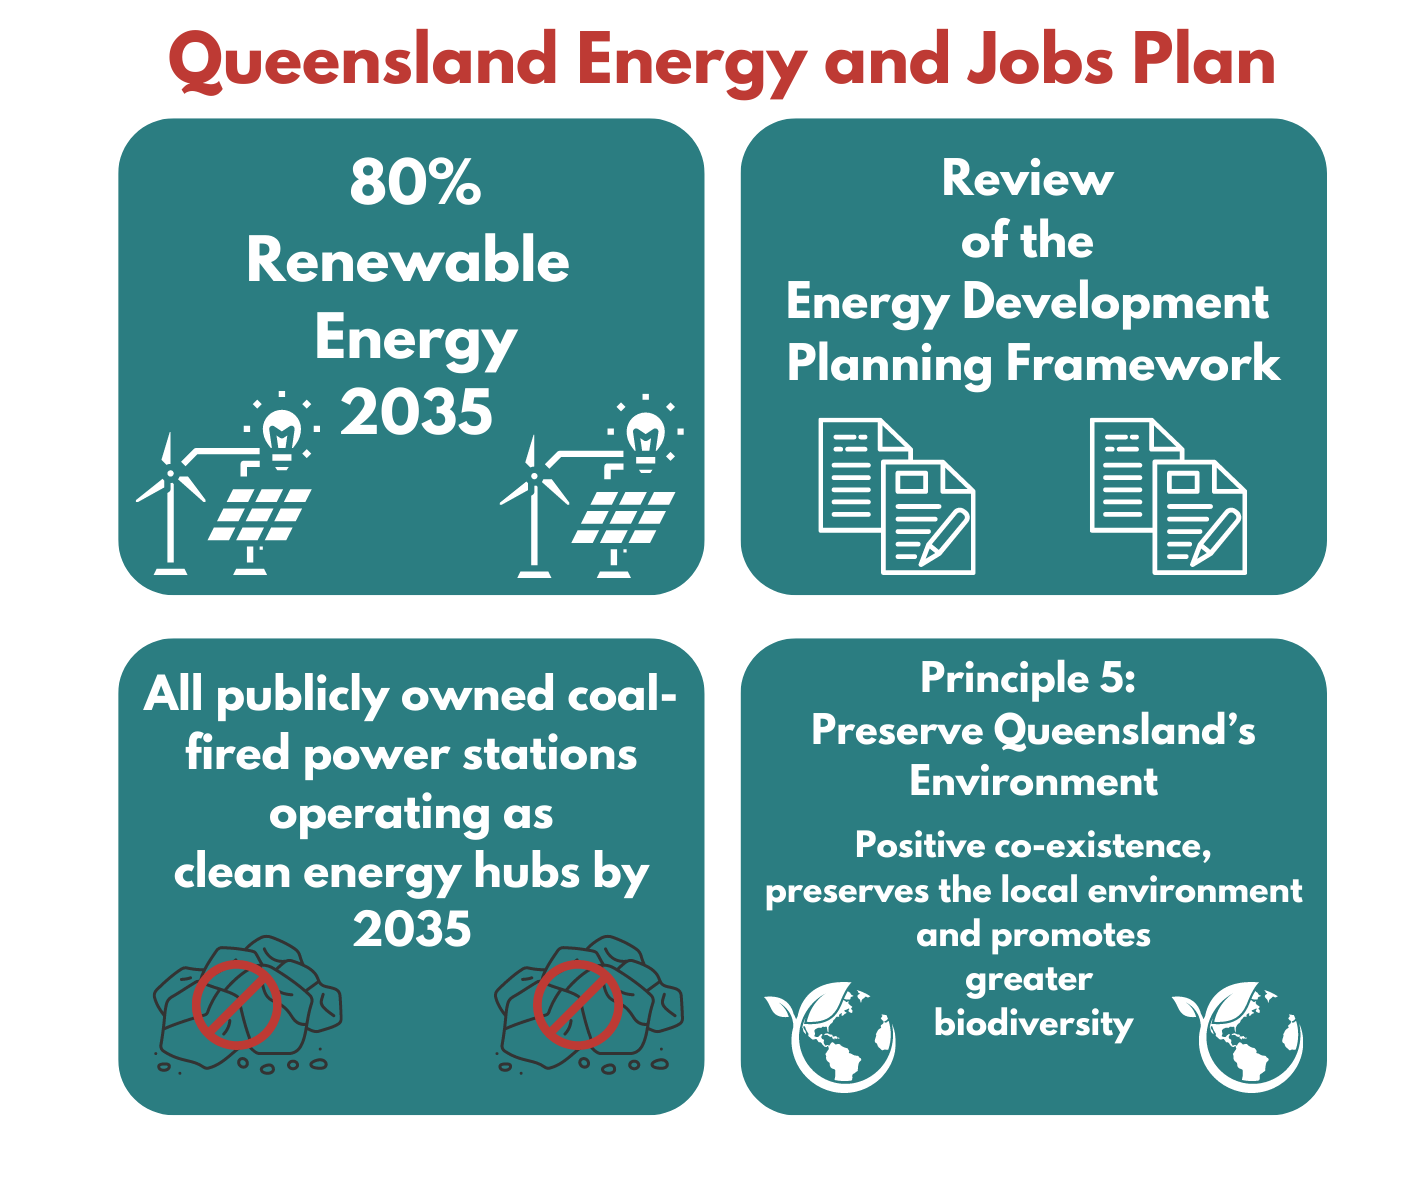 qld-energy-plan-increases-renewable-energy-ambition-and-prompts